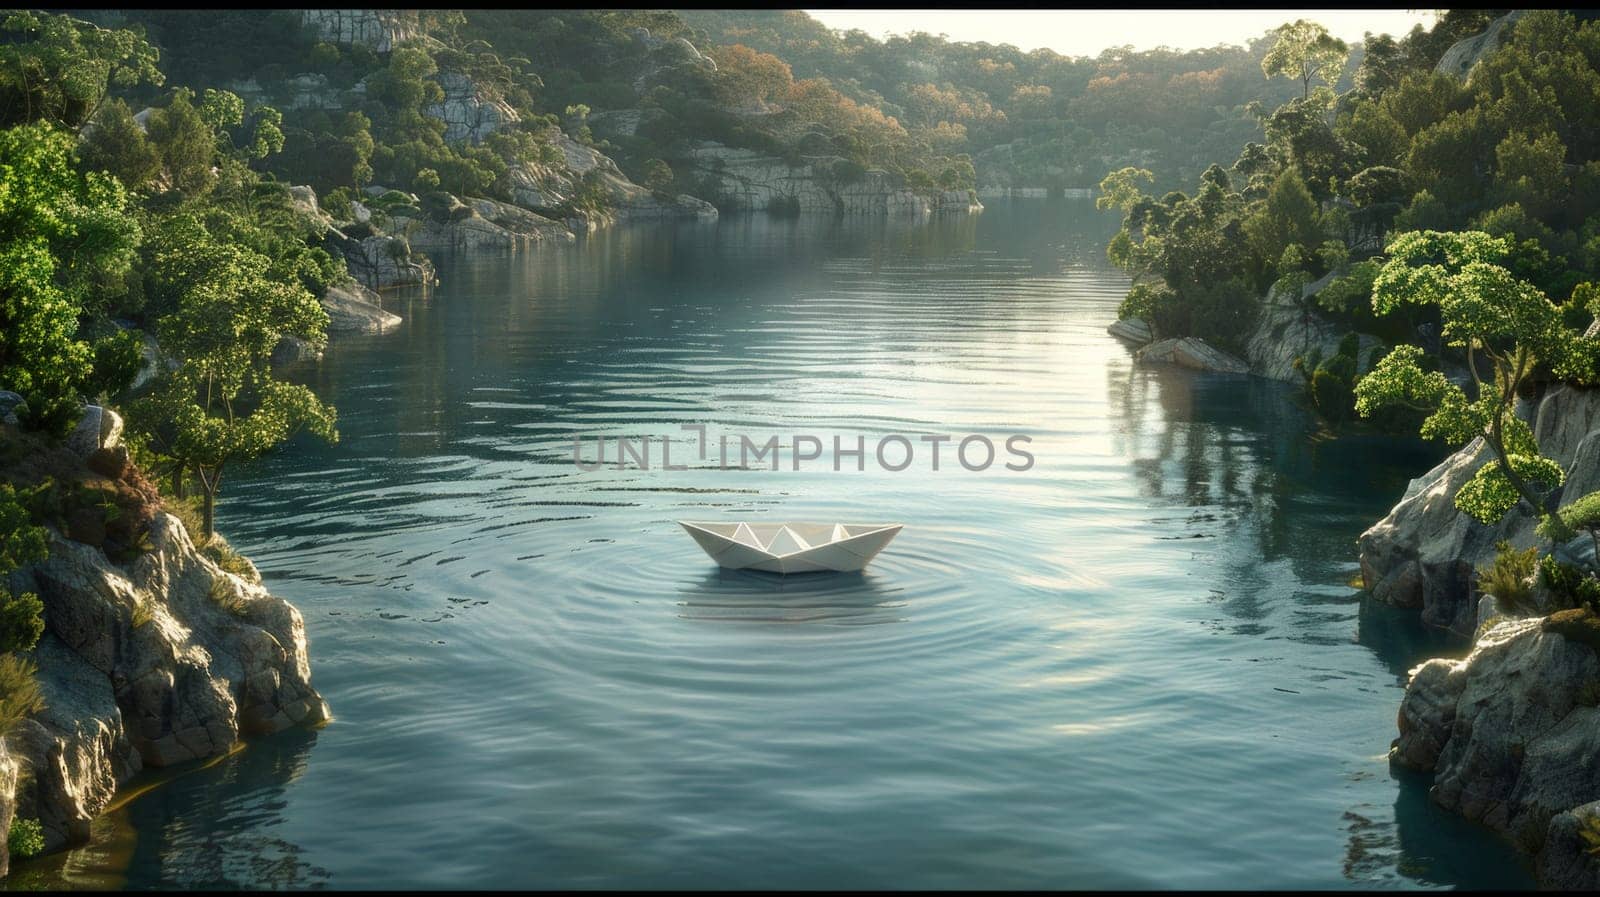 A paper boat peacefully floats atop a tranquil lake, surrounded by lush green trees reflecting in the water.